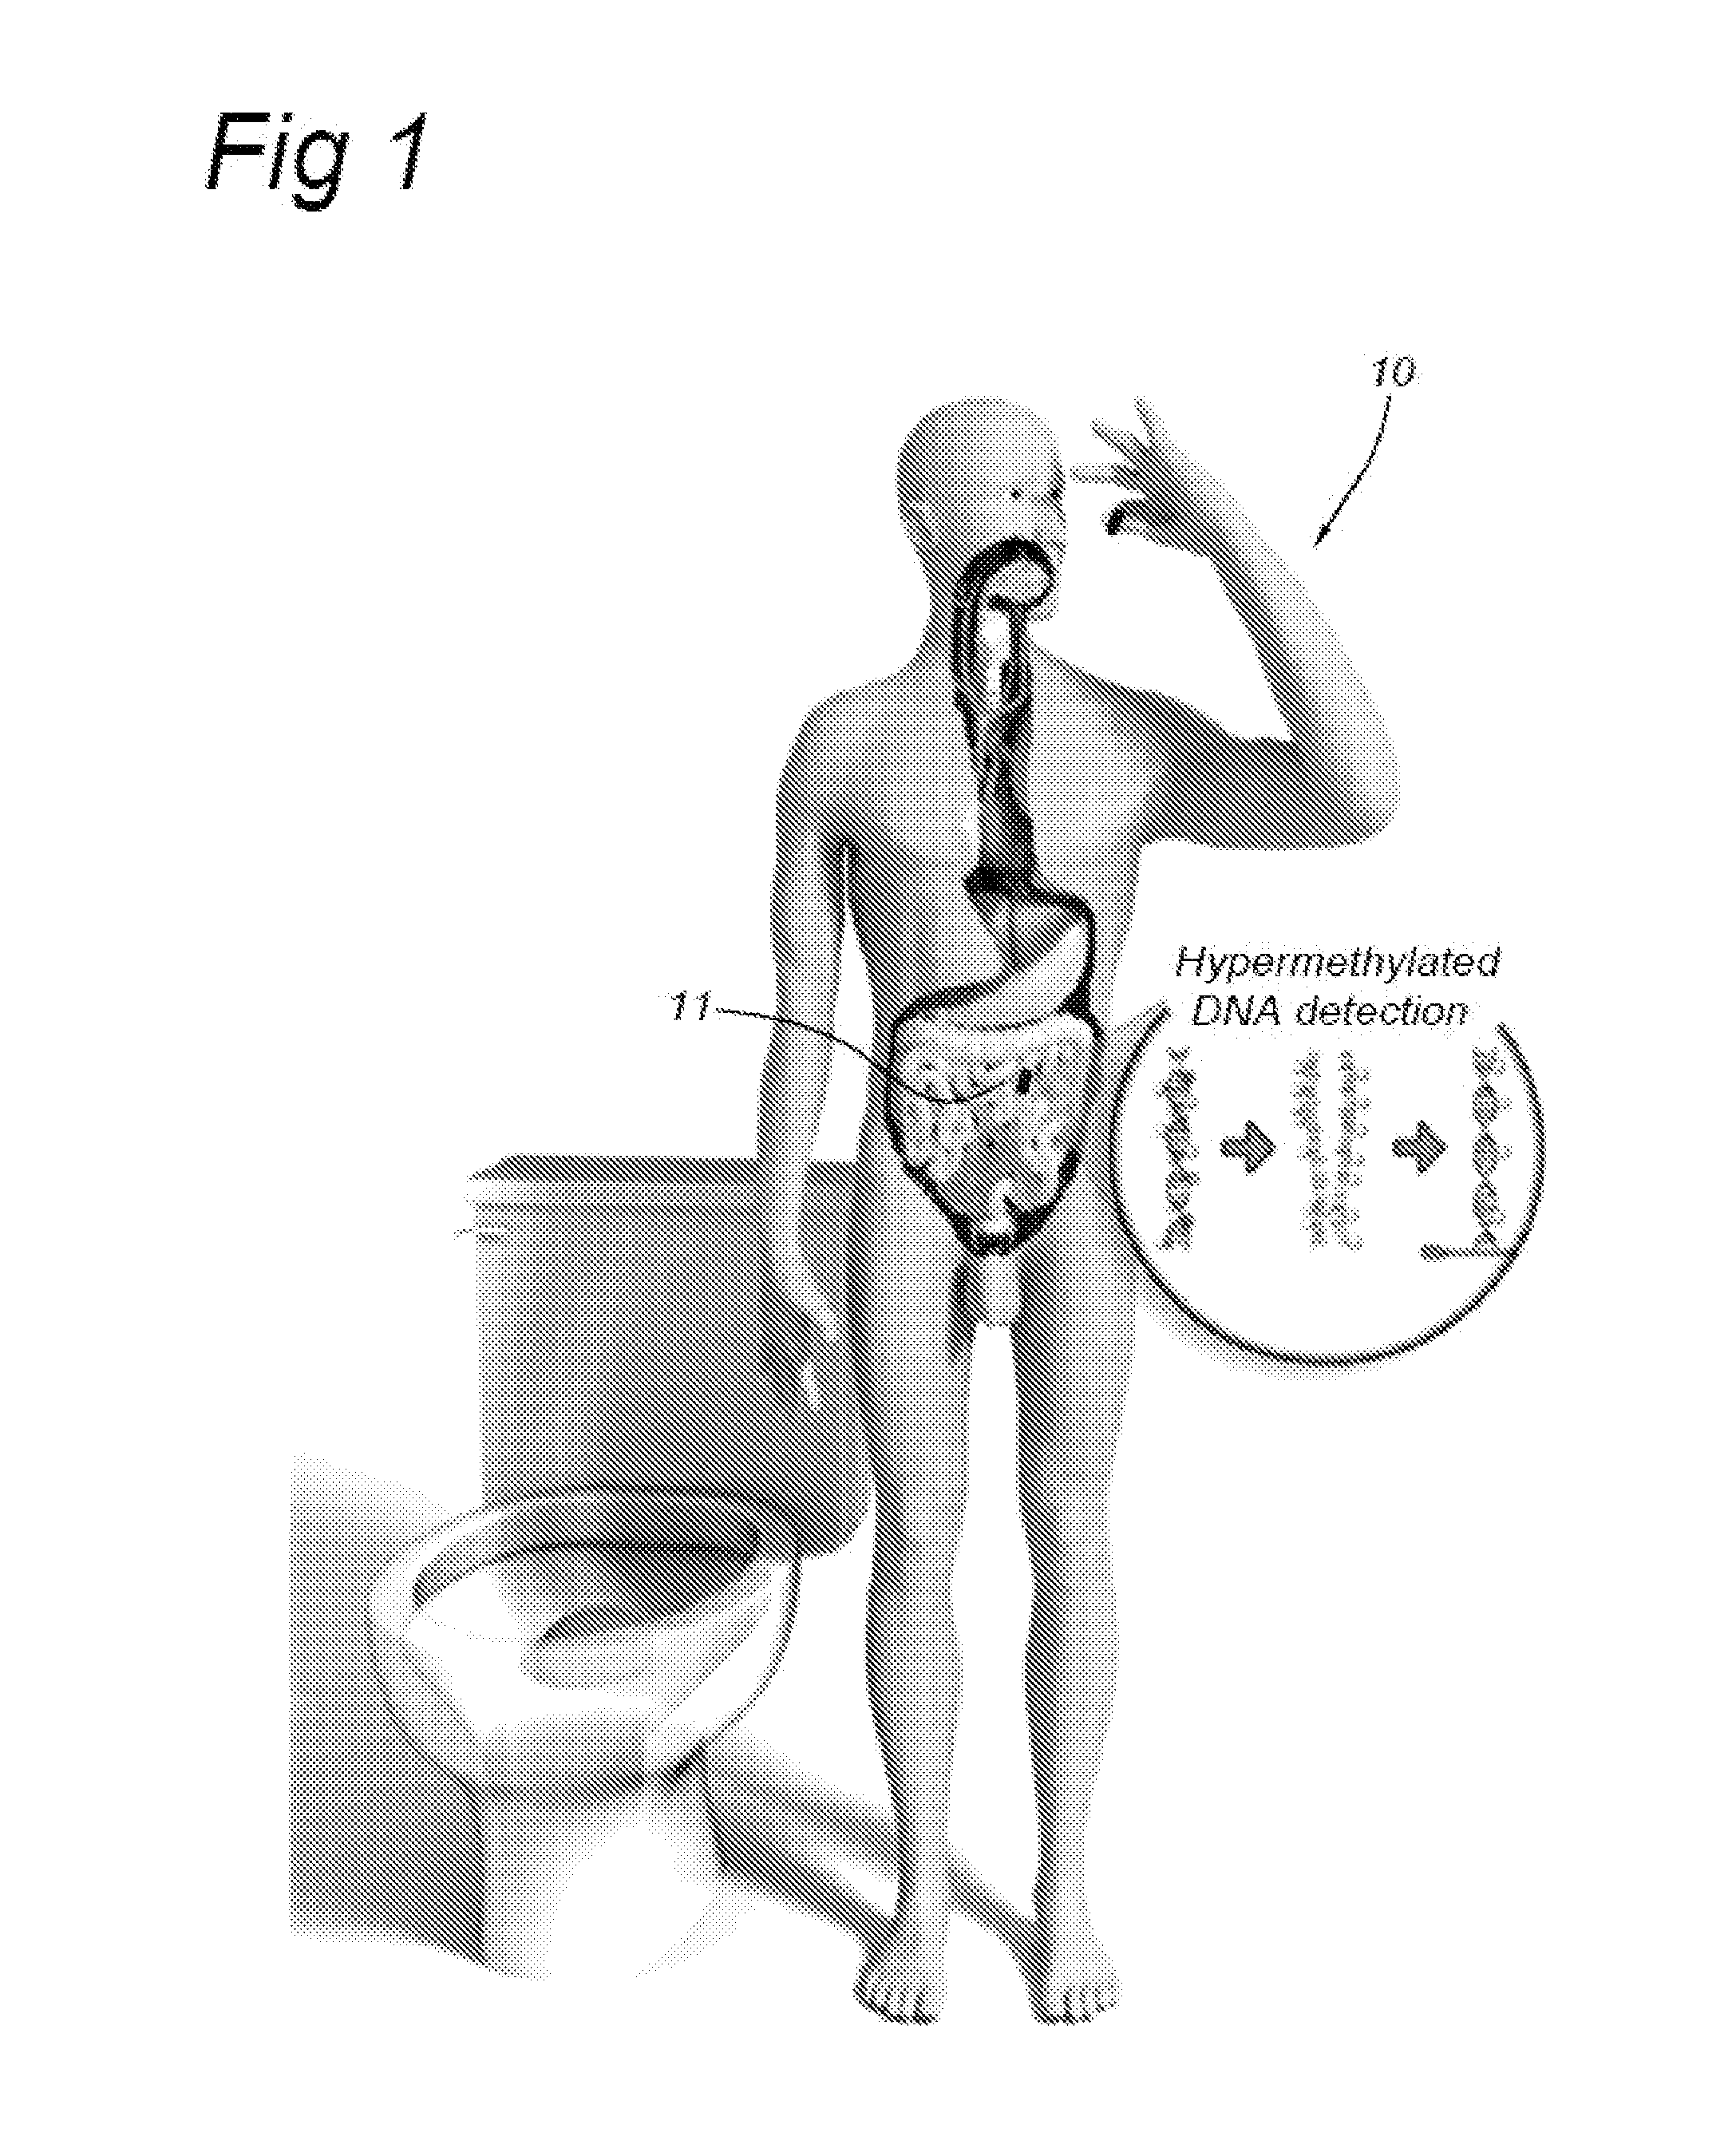 Device for detecting a medical condition or disease